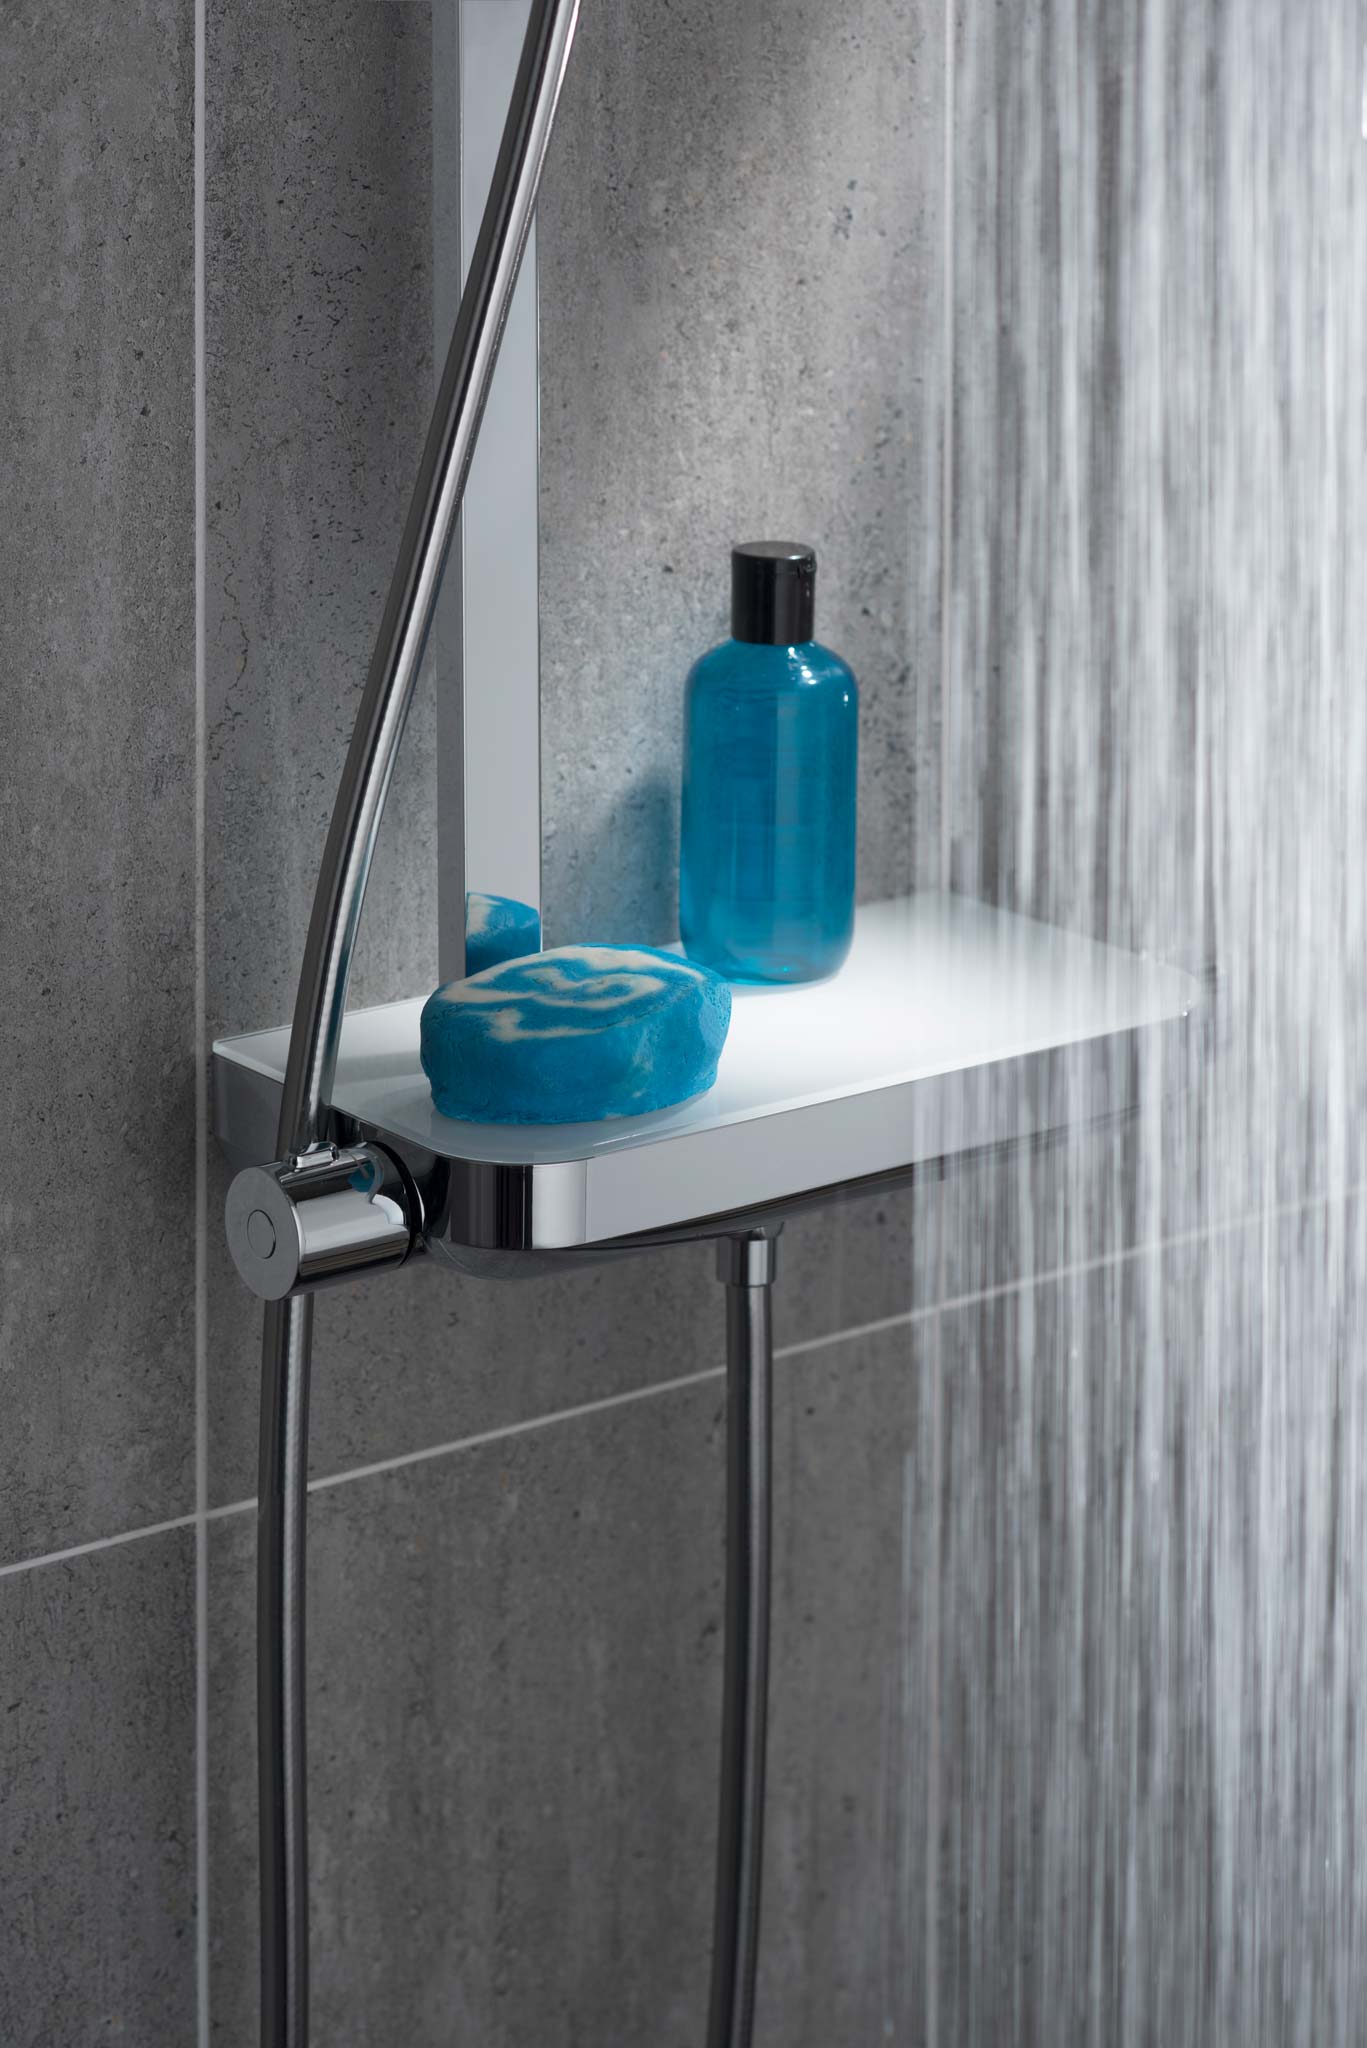 Integrated shower valve with shelf and blue soap and shower gel bottle